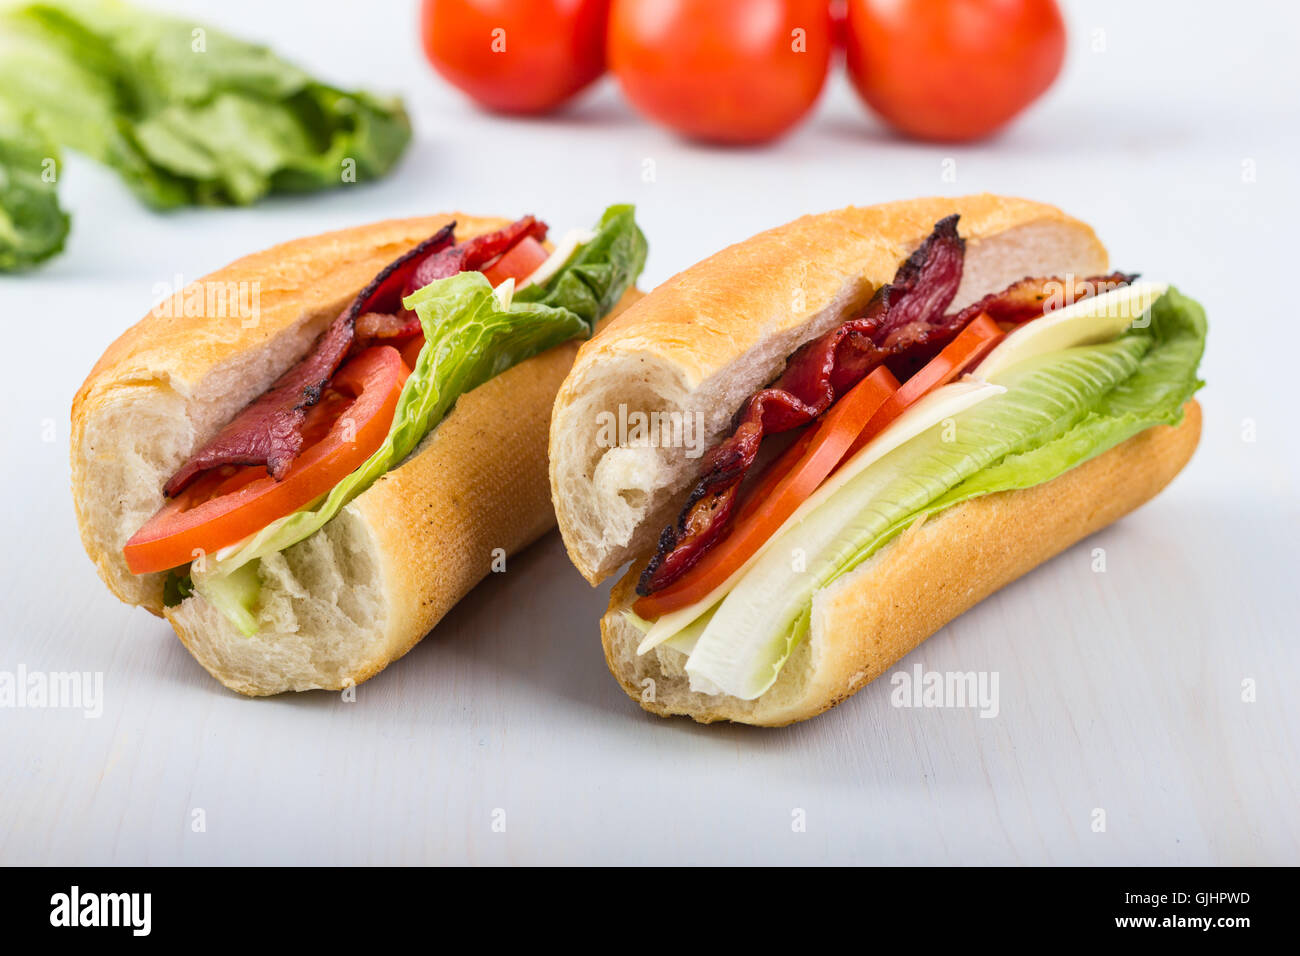 Fresh sandwich with tomatoes, bacon, and lettuce. Stock Photo